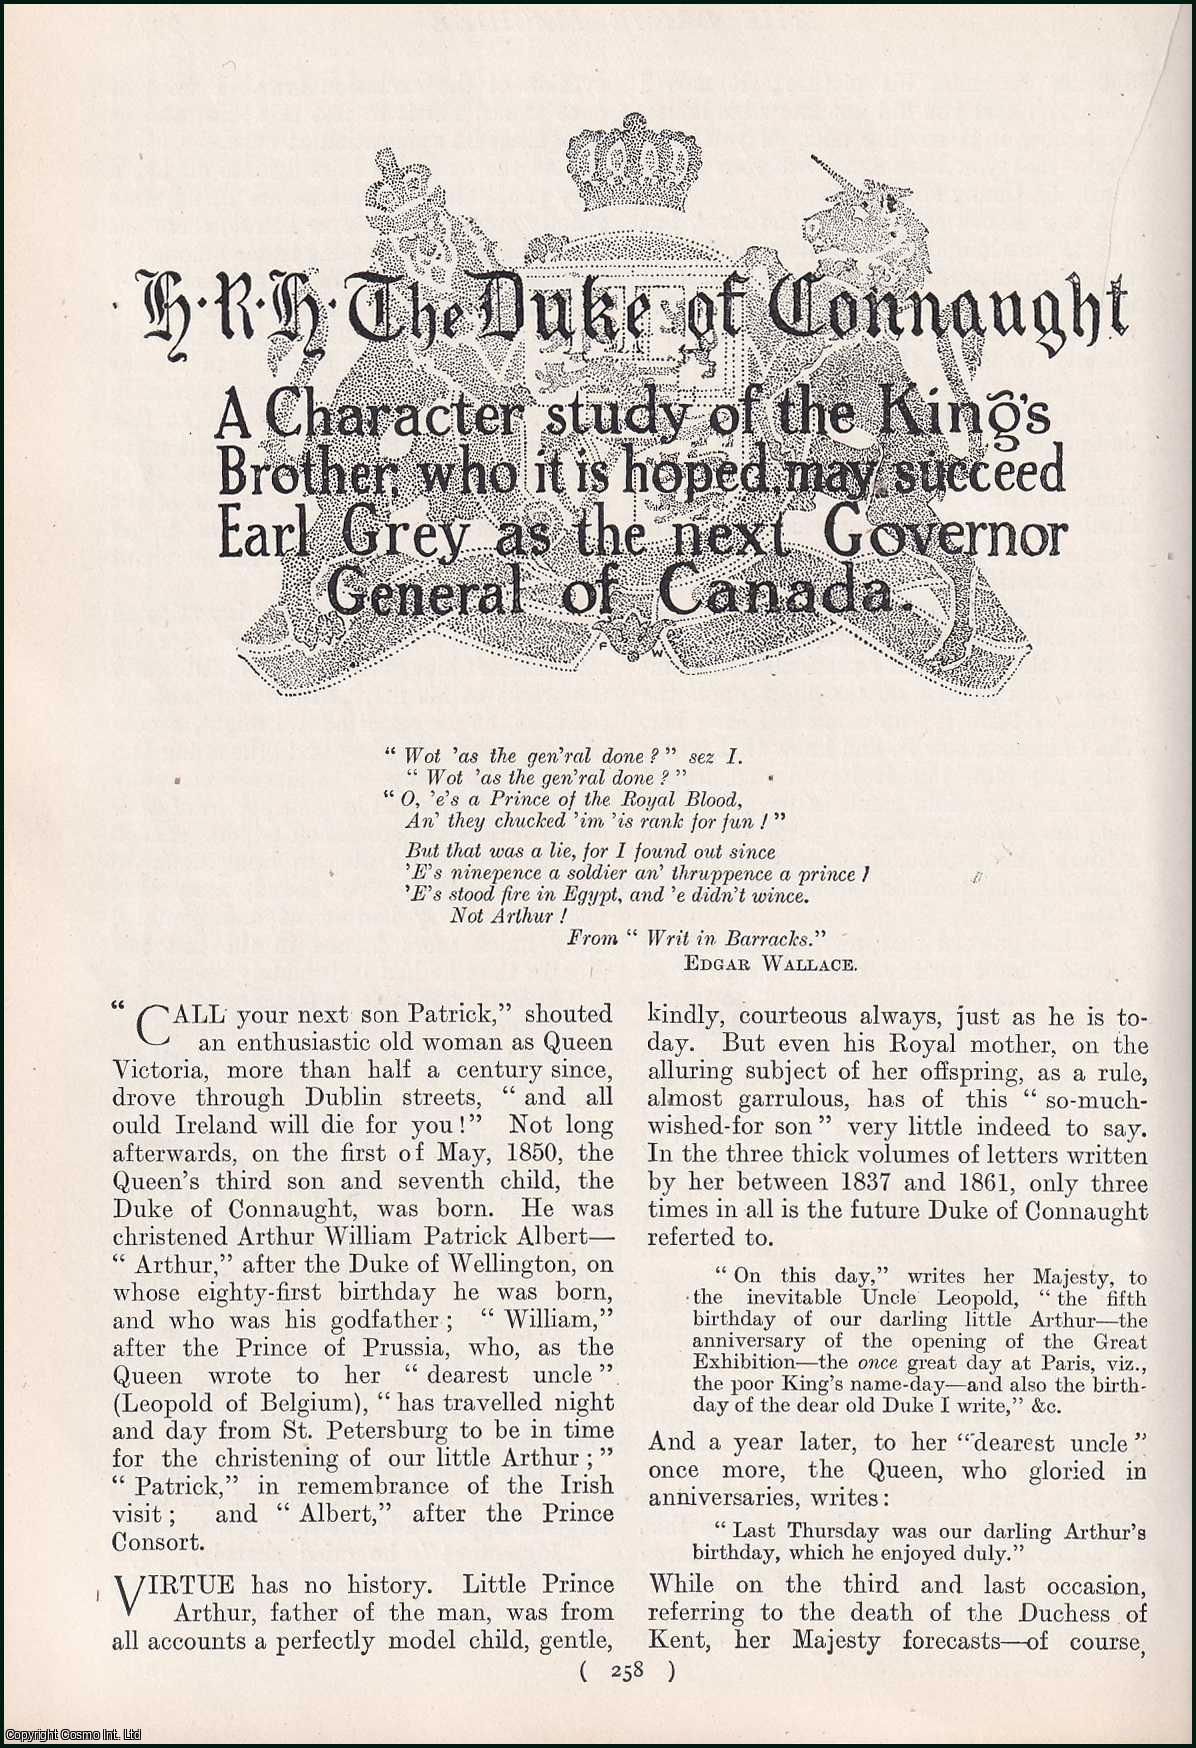 No Author Stated - H.R.H. The Duke of Connaught : a Character Study of the King's Brother who it is hoped may succeed Earl Grey as the next Governor General of Canada. An uncommon original article from the Harmsworth London Magazine, 1910.